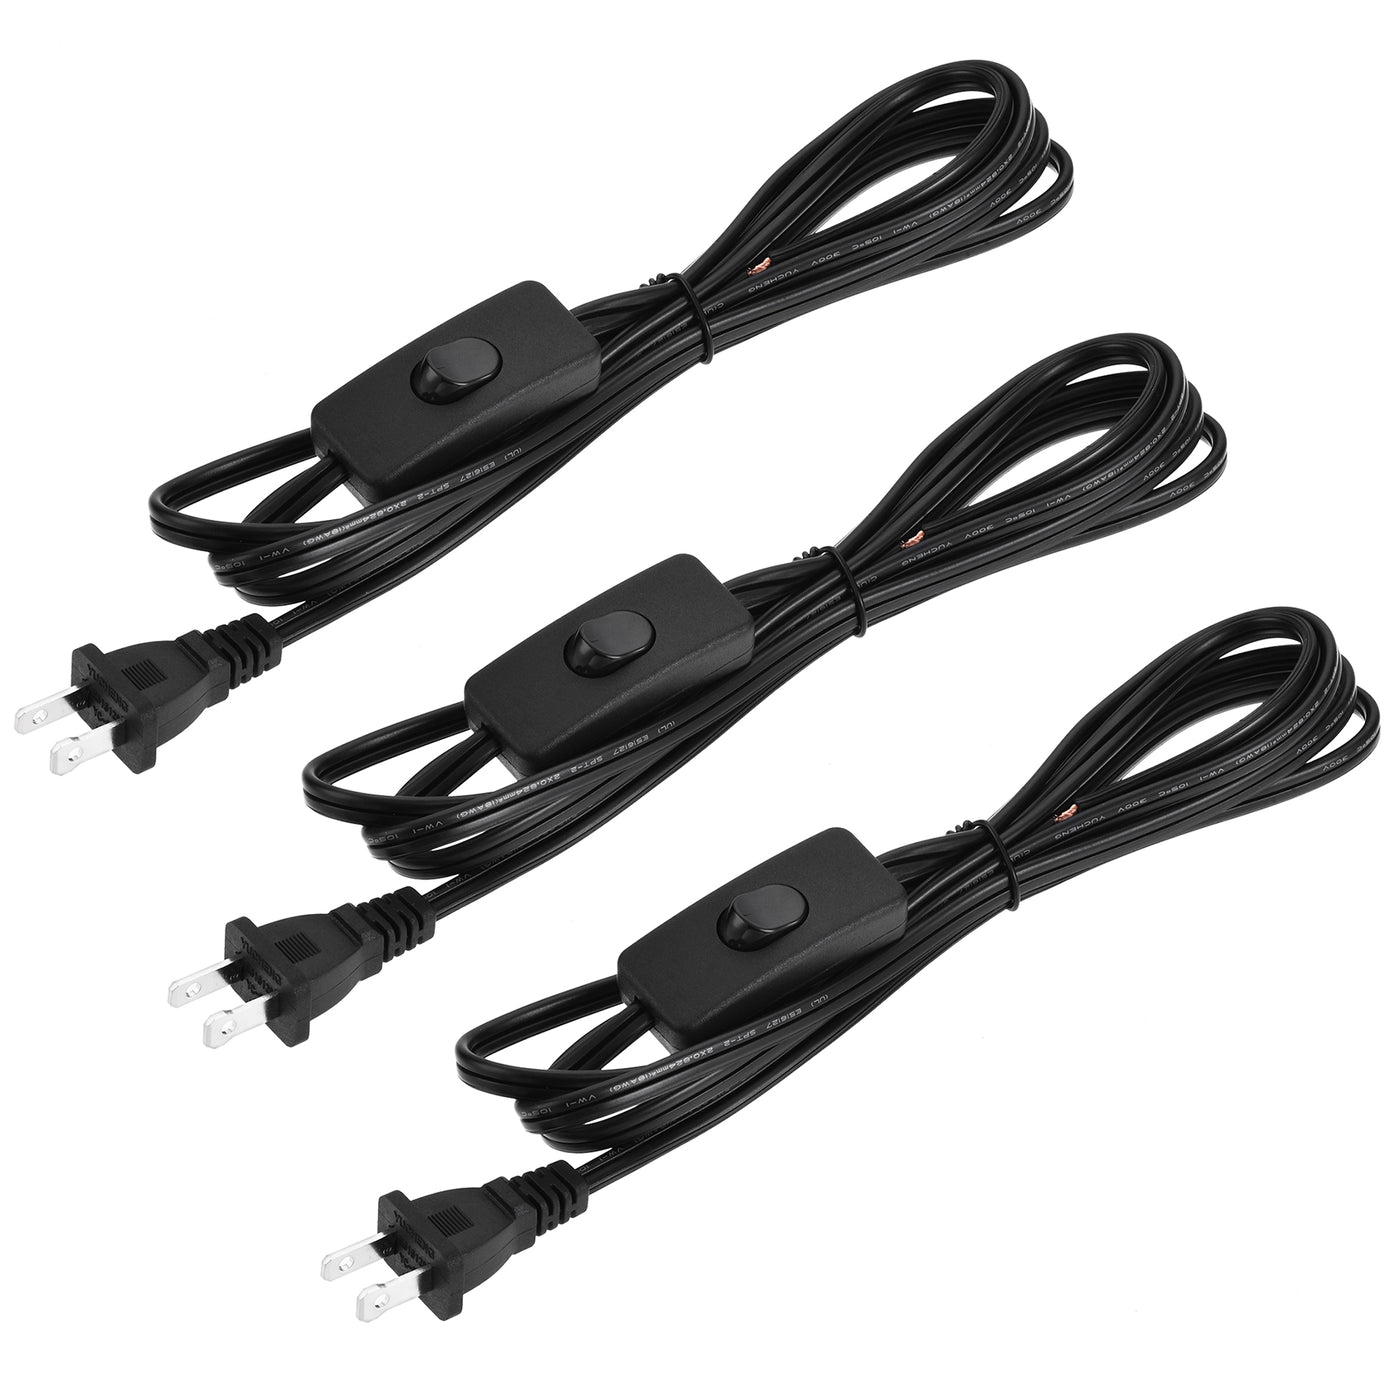 uxcell Uxcell US Plug Lamp Cord with Switch, SPT-2 18AWG Power Wire 1.8M Black, UL Listed 3Pcs